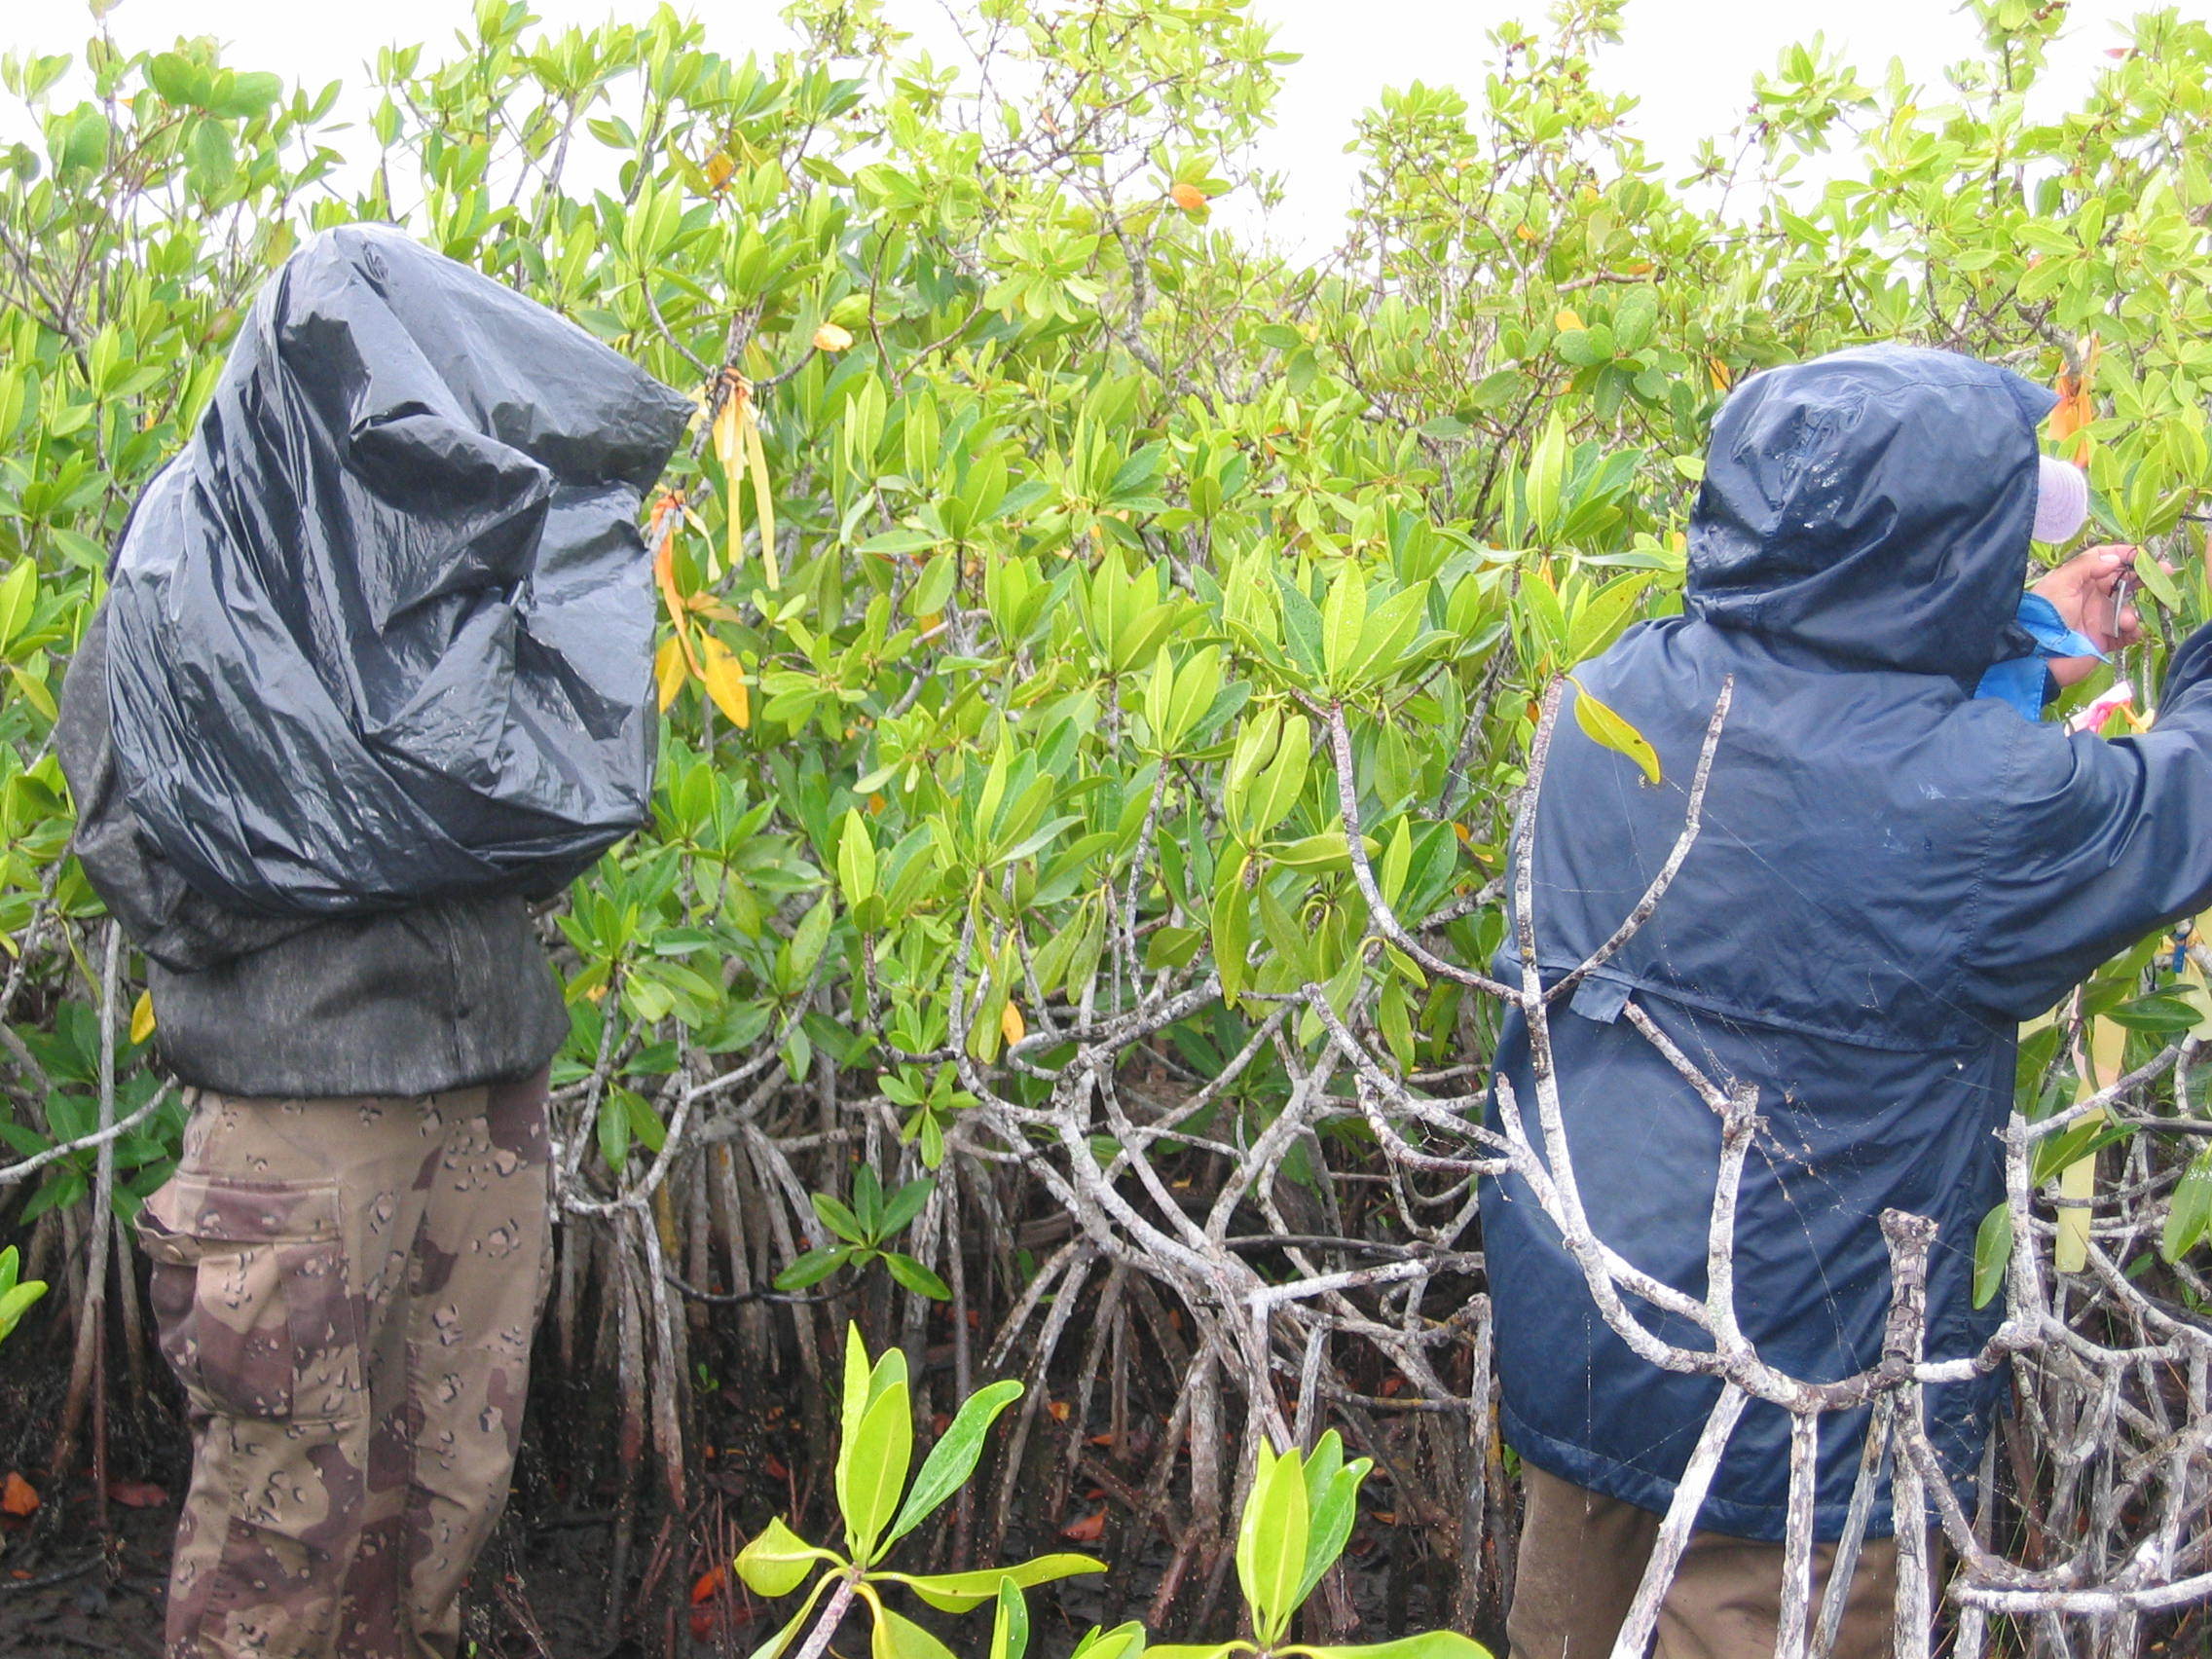 Left to right: Nicole Poret and Edward Castaneda measuring mangrove leaf turnover at TS/Ph-8